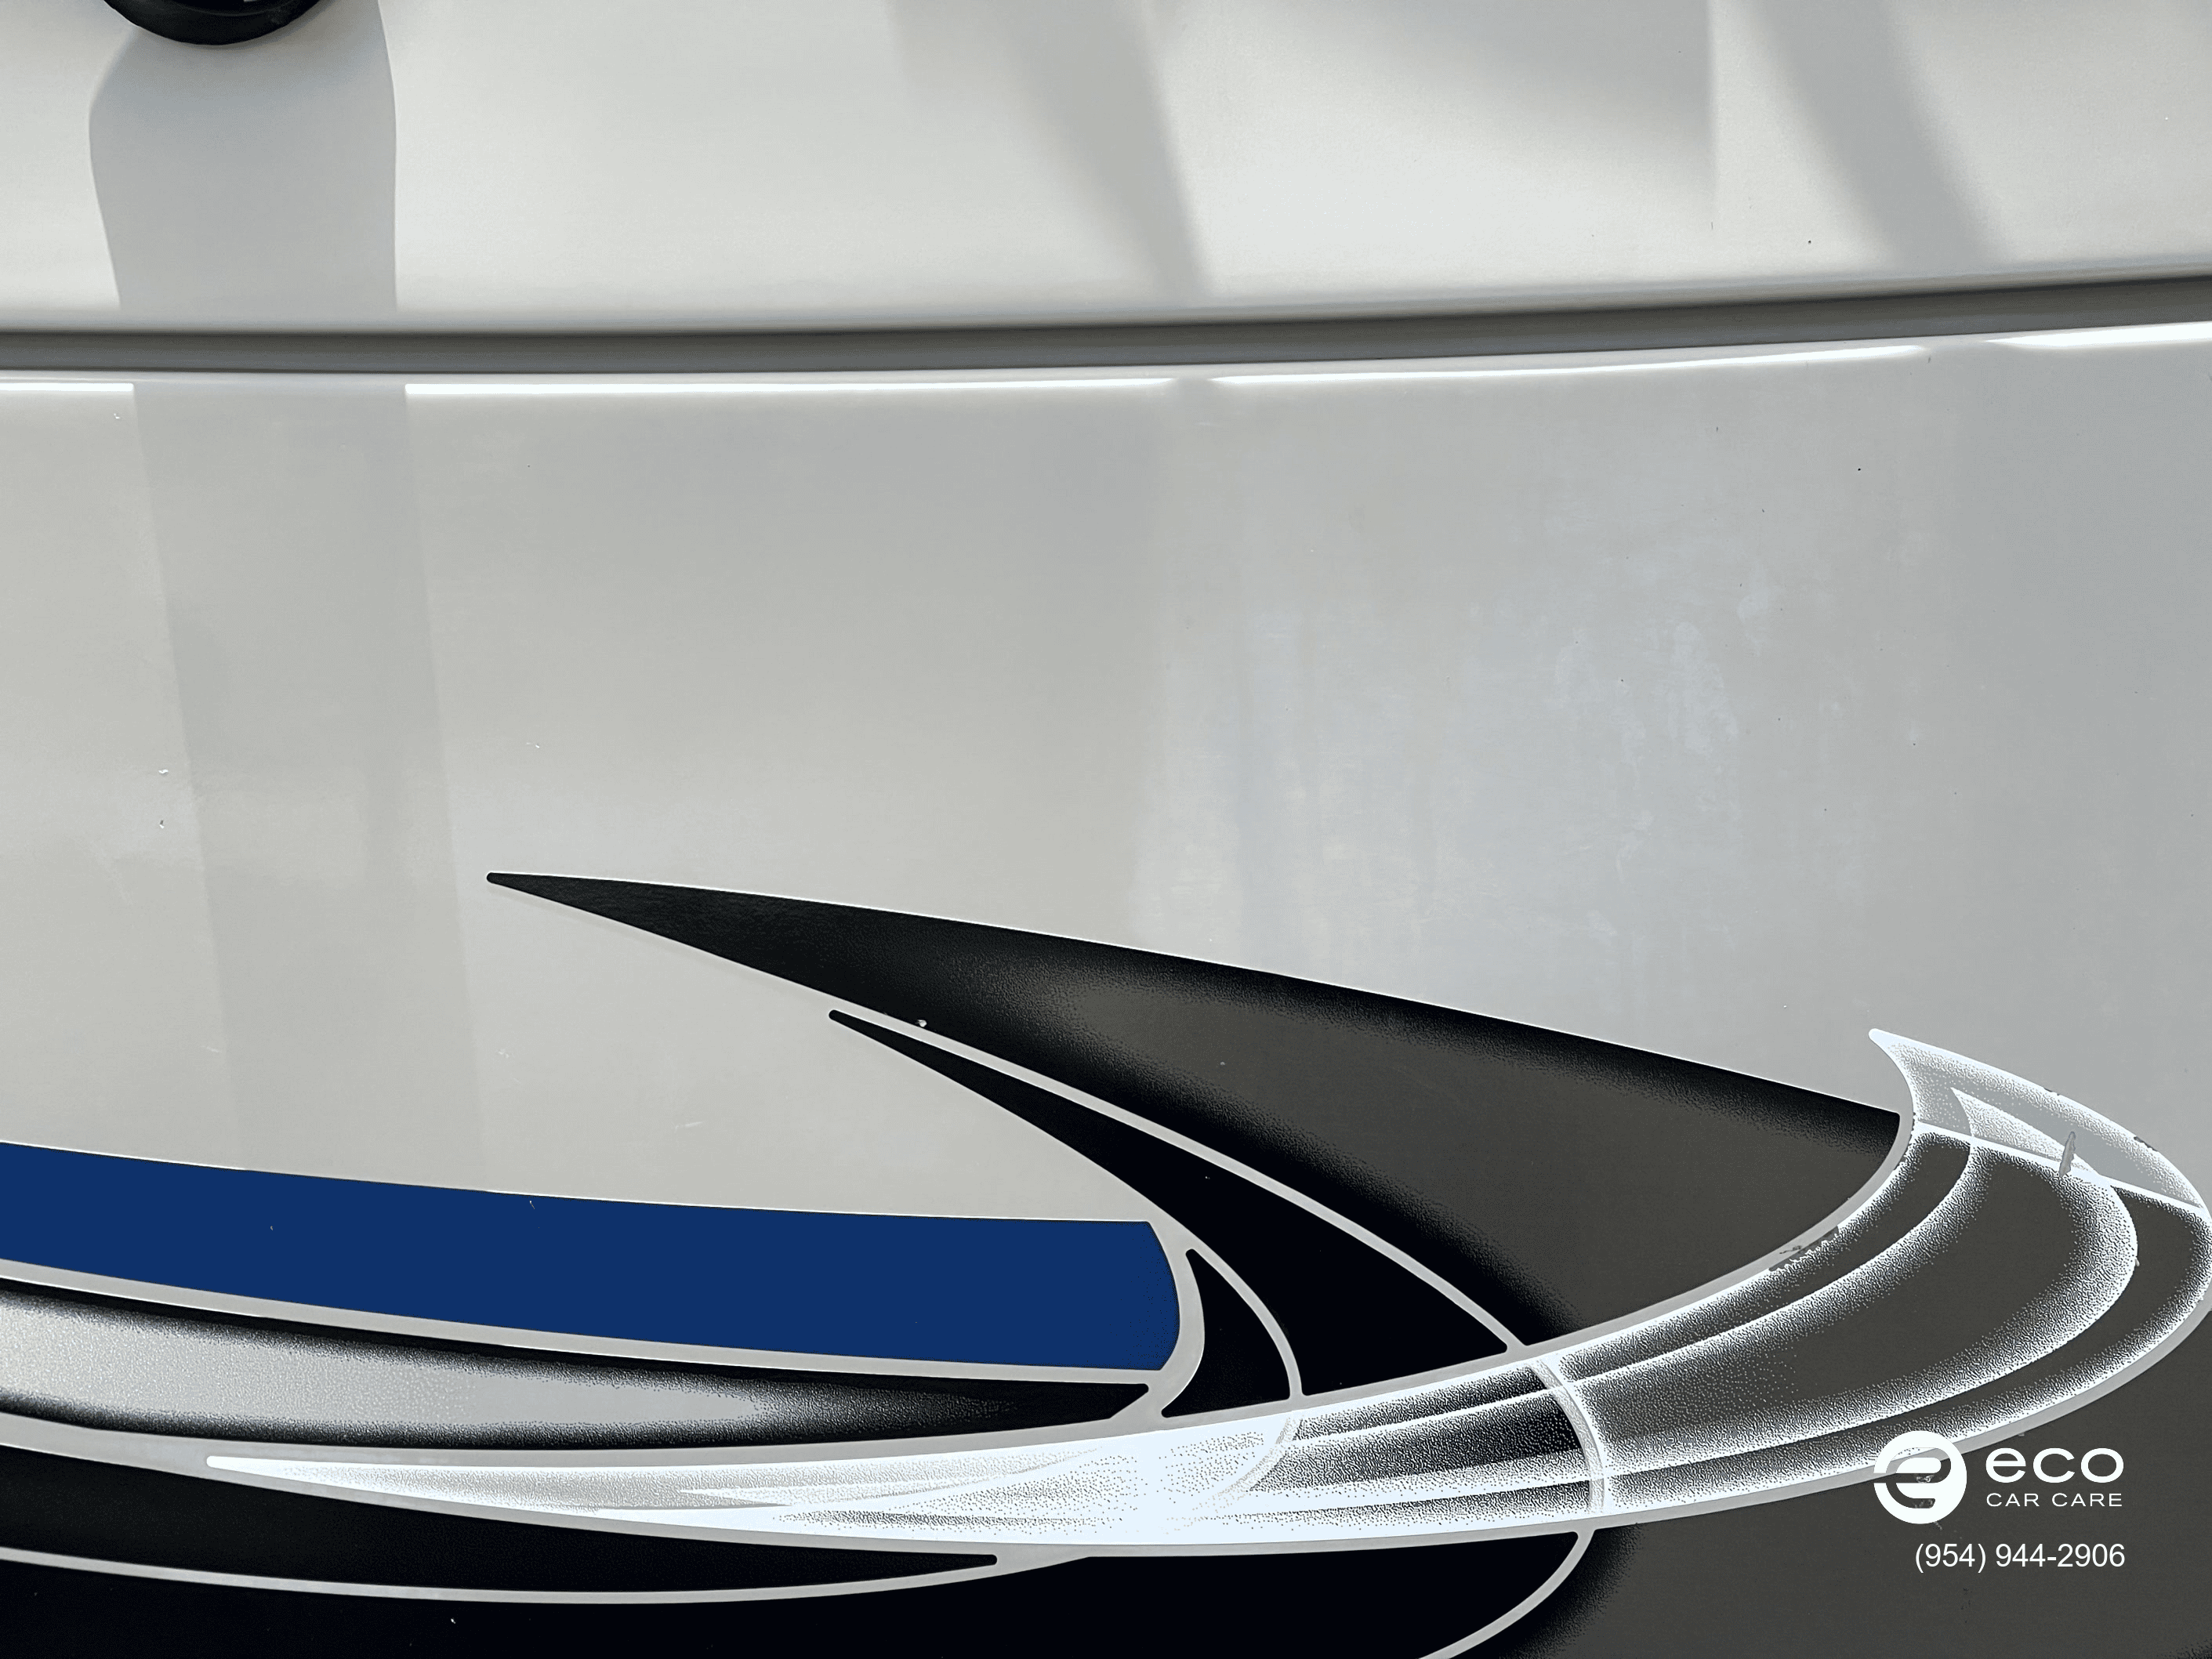 mobile rv detailing services near me